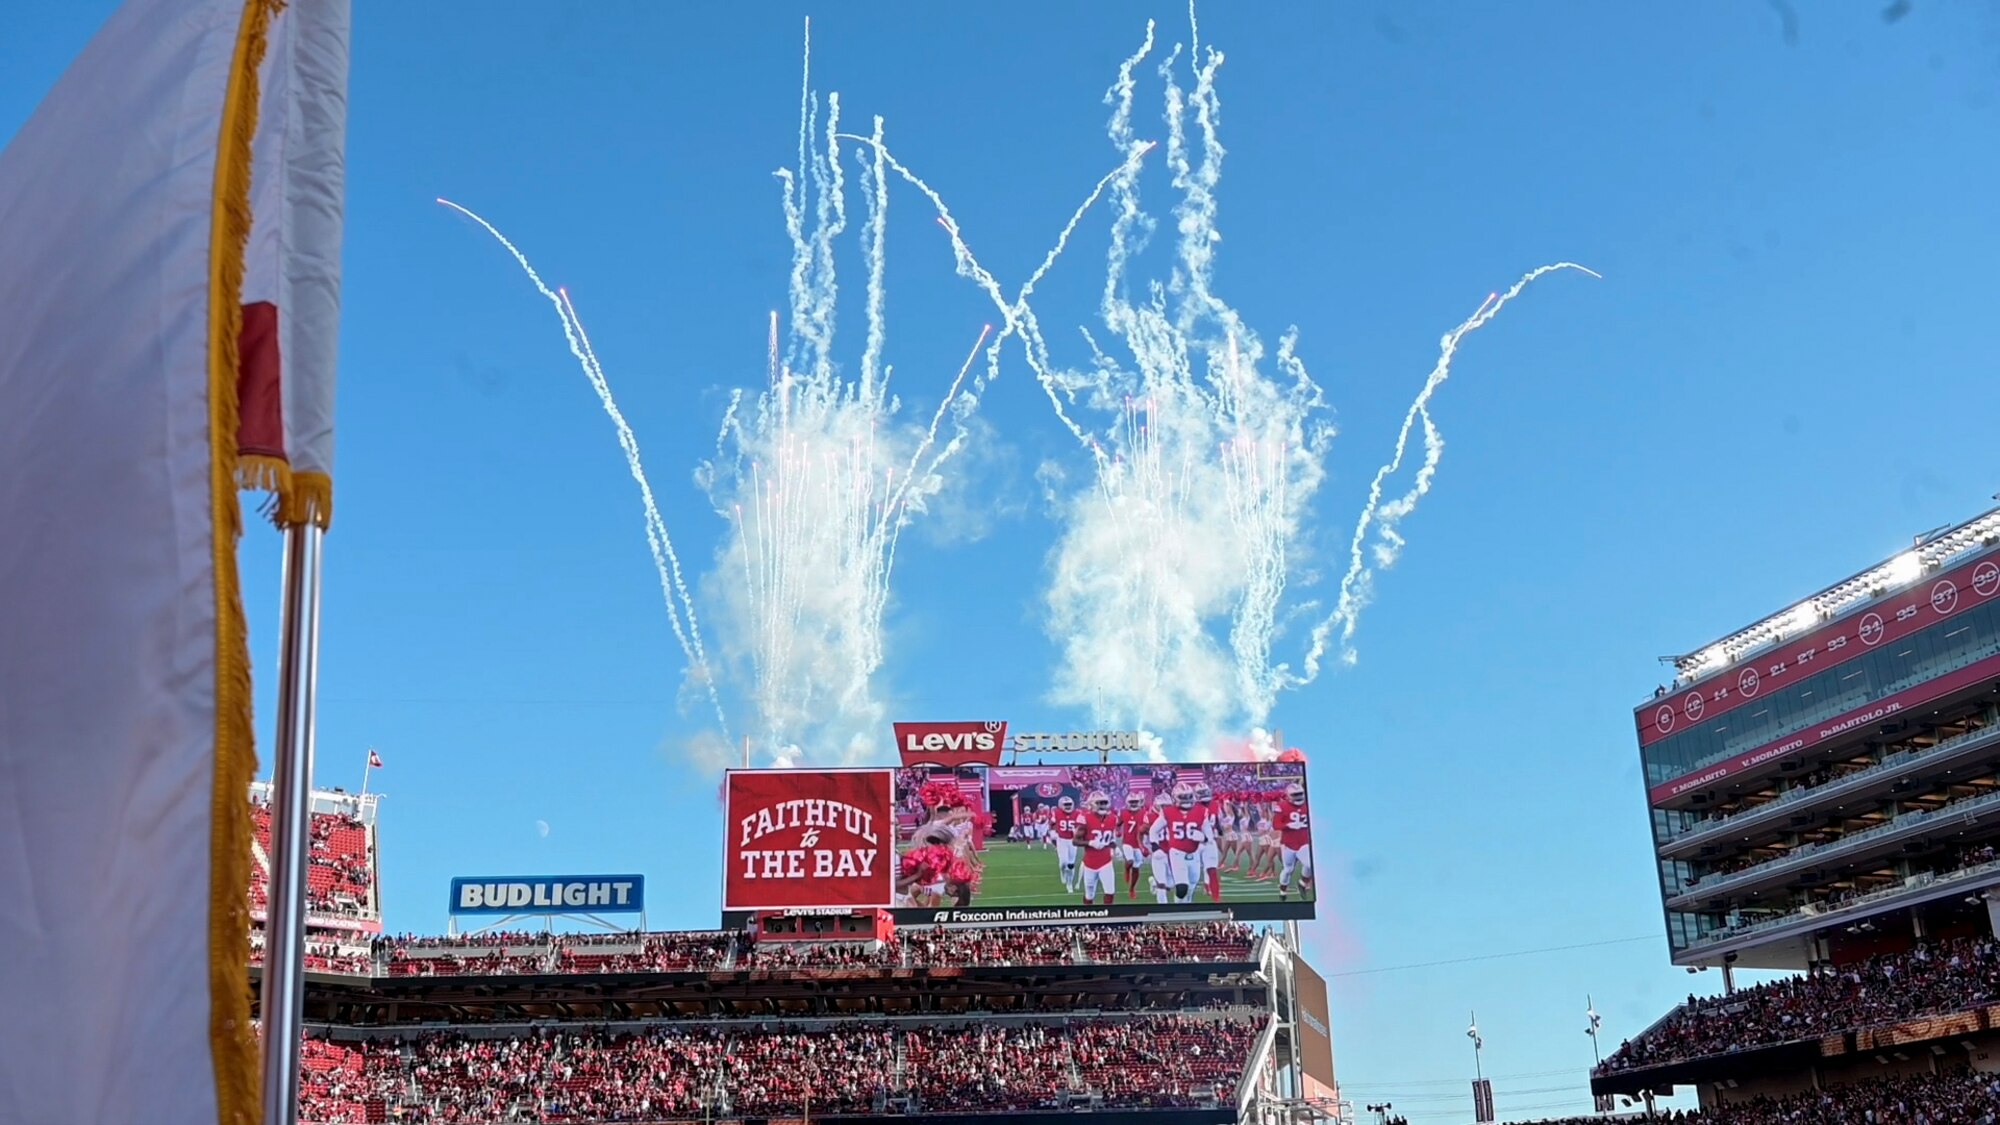 The 412th Test Wing launched 419 Flight Test Squadron's B-1B Lancer from Edwards Air Force Base, California, to conduct a flyover during NFL Monday Night Football's San Francisco 49ers vs Los Angeles Rams game at Levi's Stadium, October  3.